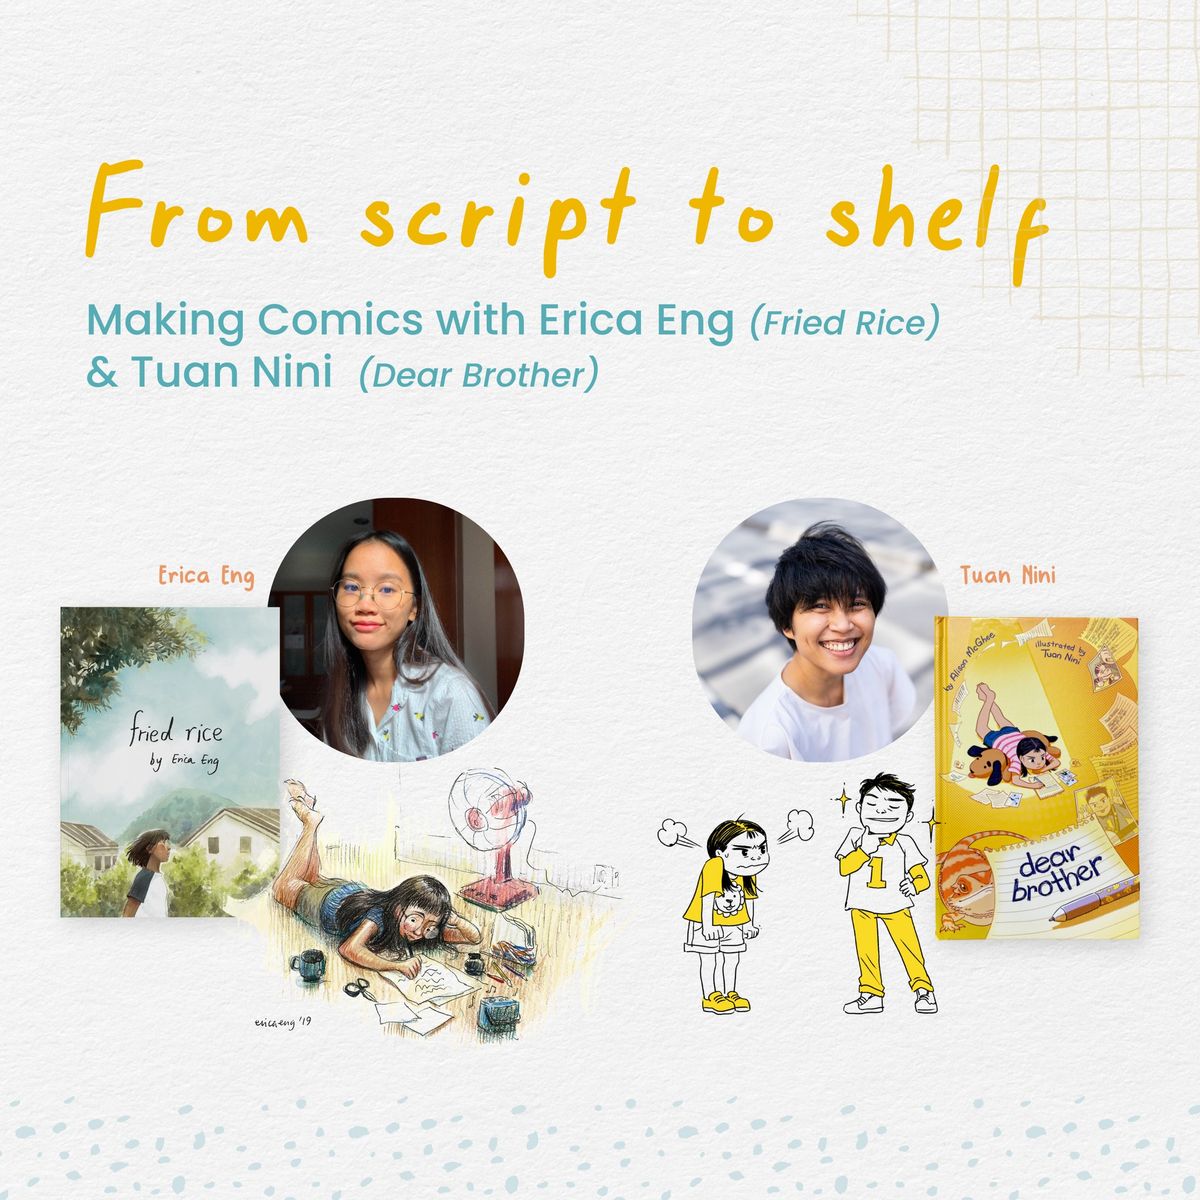 FROM SCRIPT TO SHELF: MAKING COMICS WITH ERICA ENG (FRIED RICE) & TUAN NINI (DEAR BROTHER)